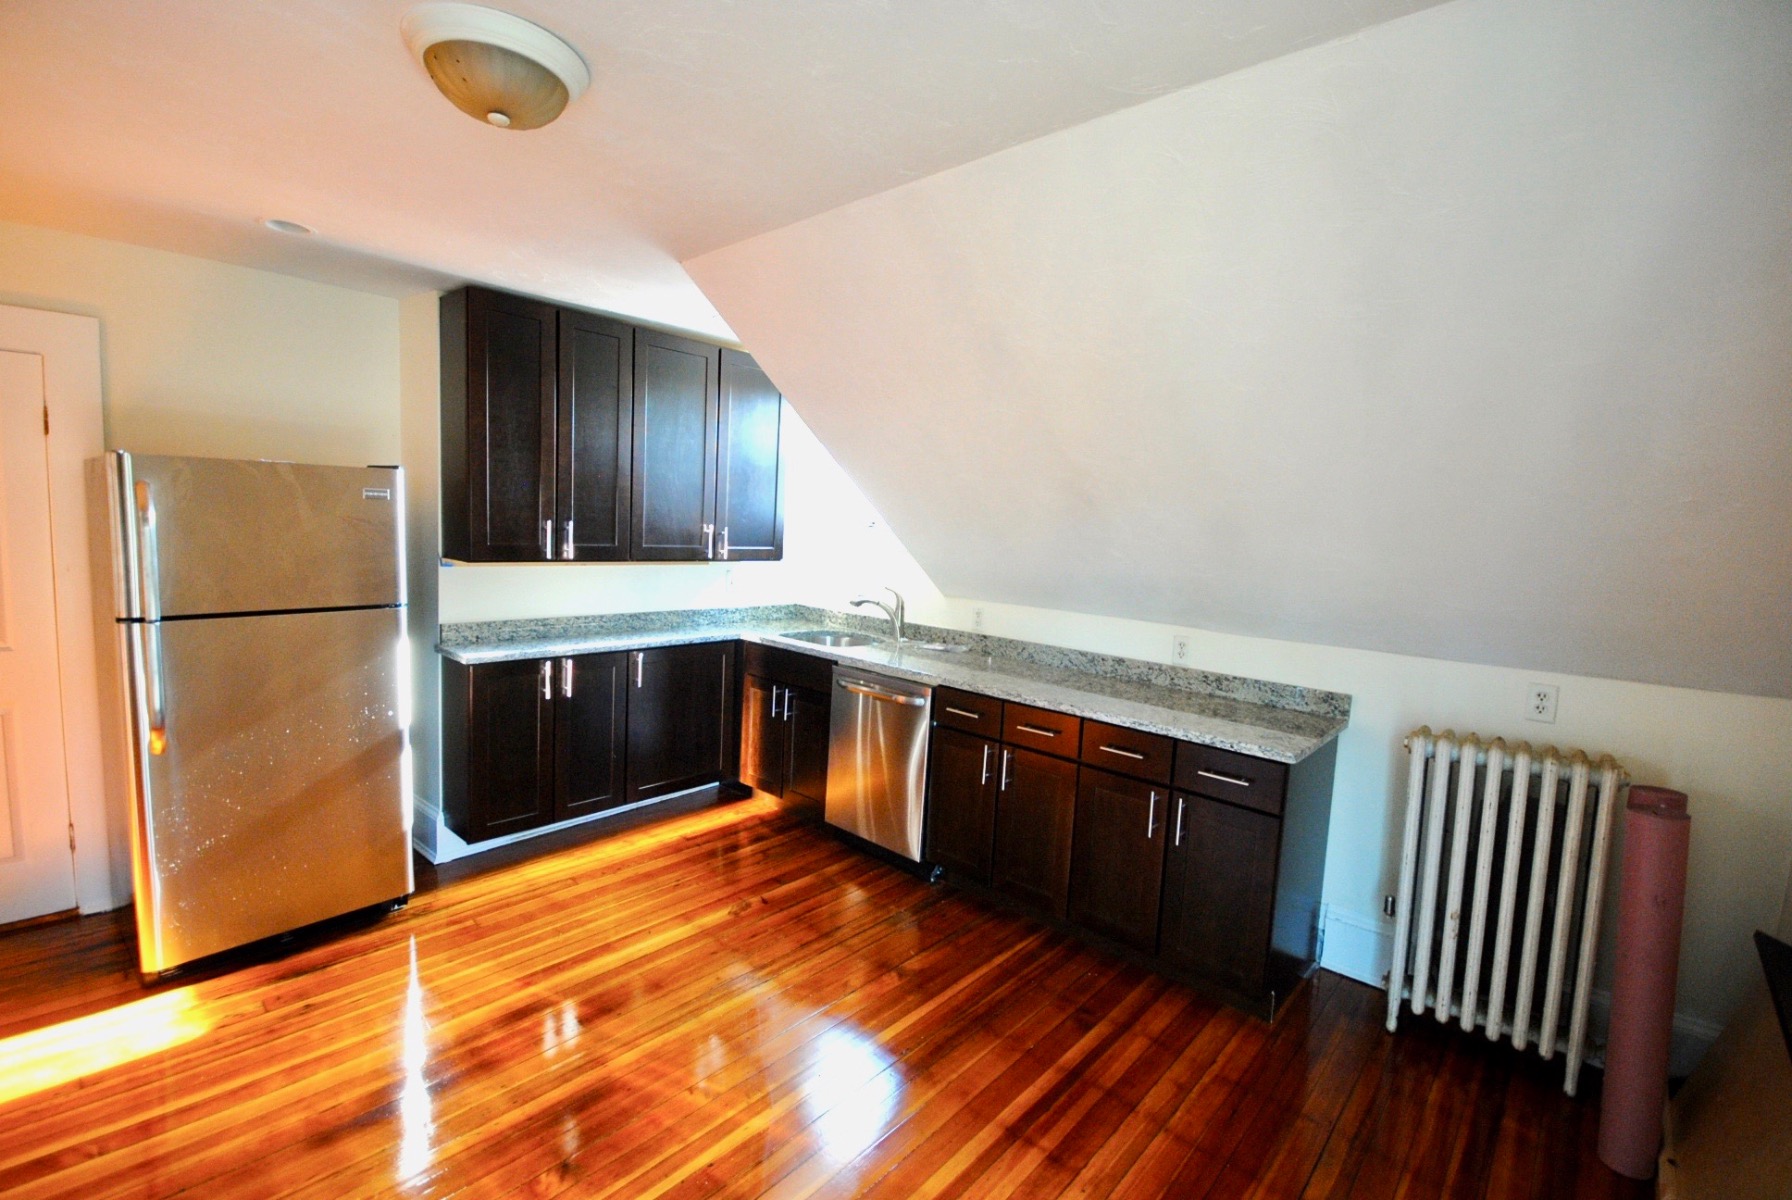 Photos of apartment on Dickens St.,Boston MA 02122